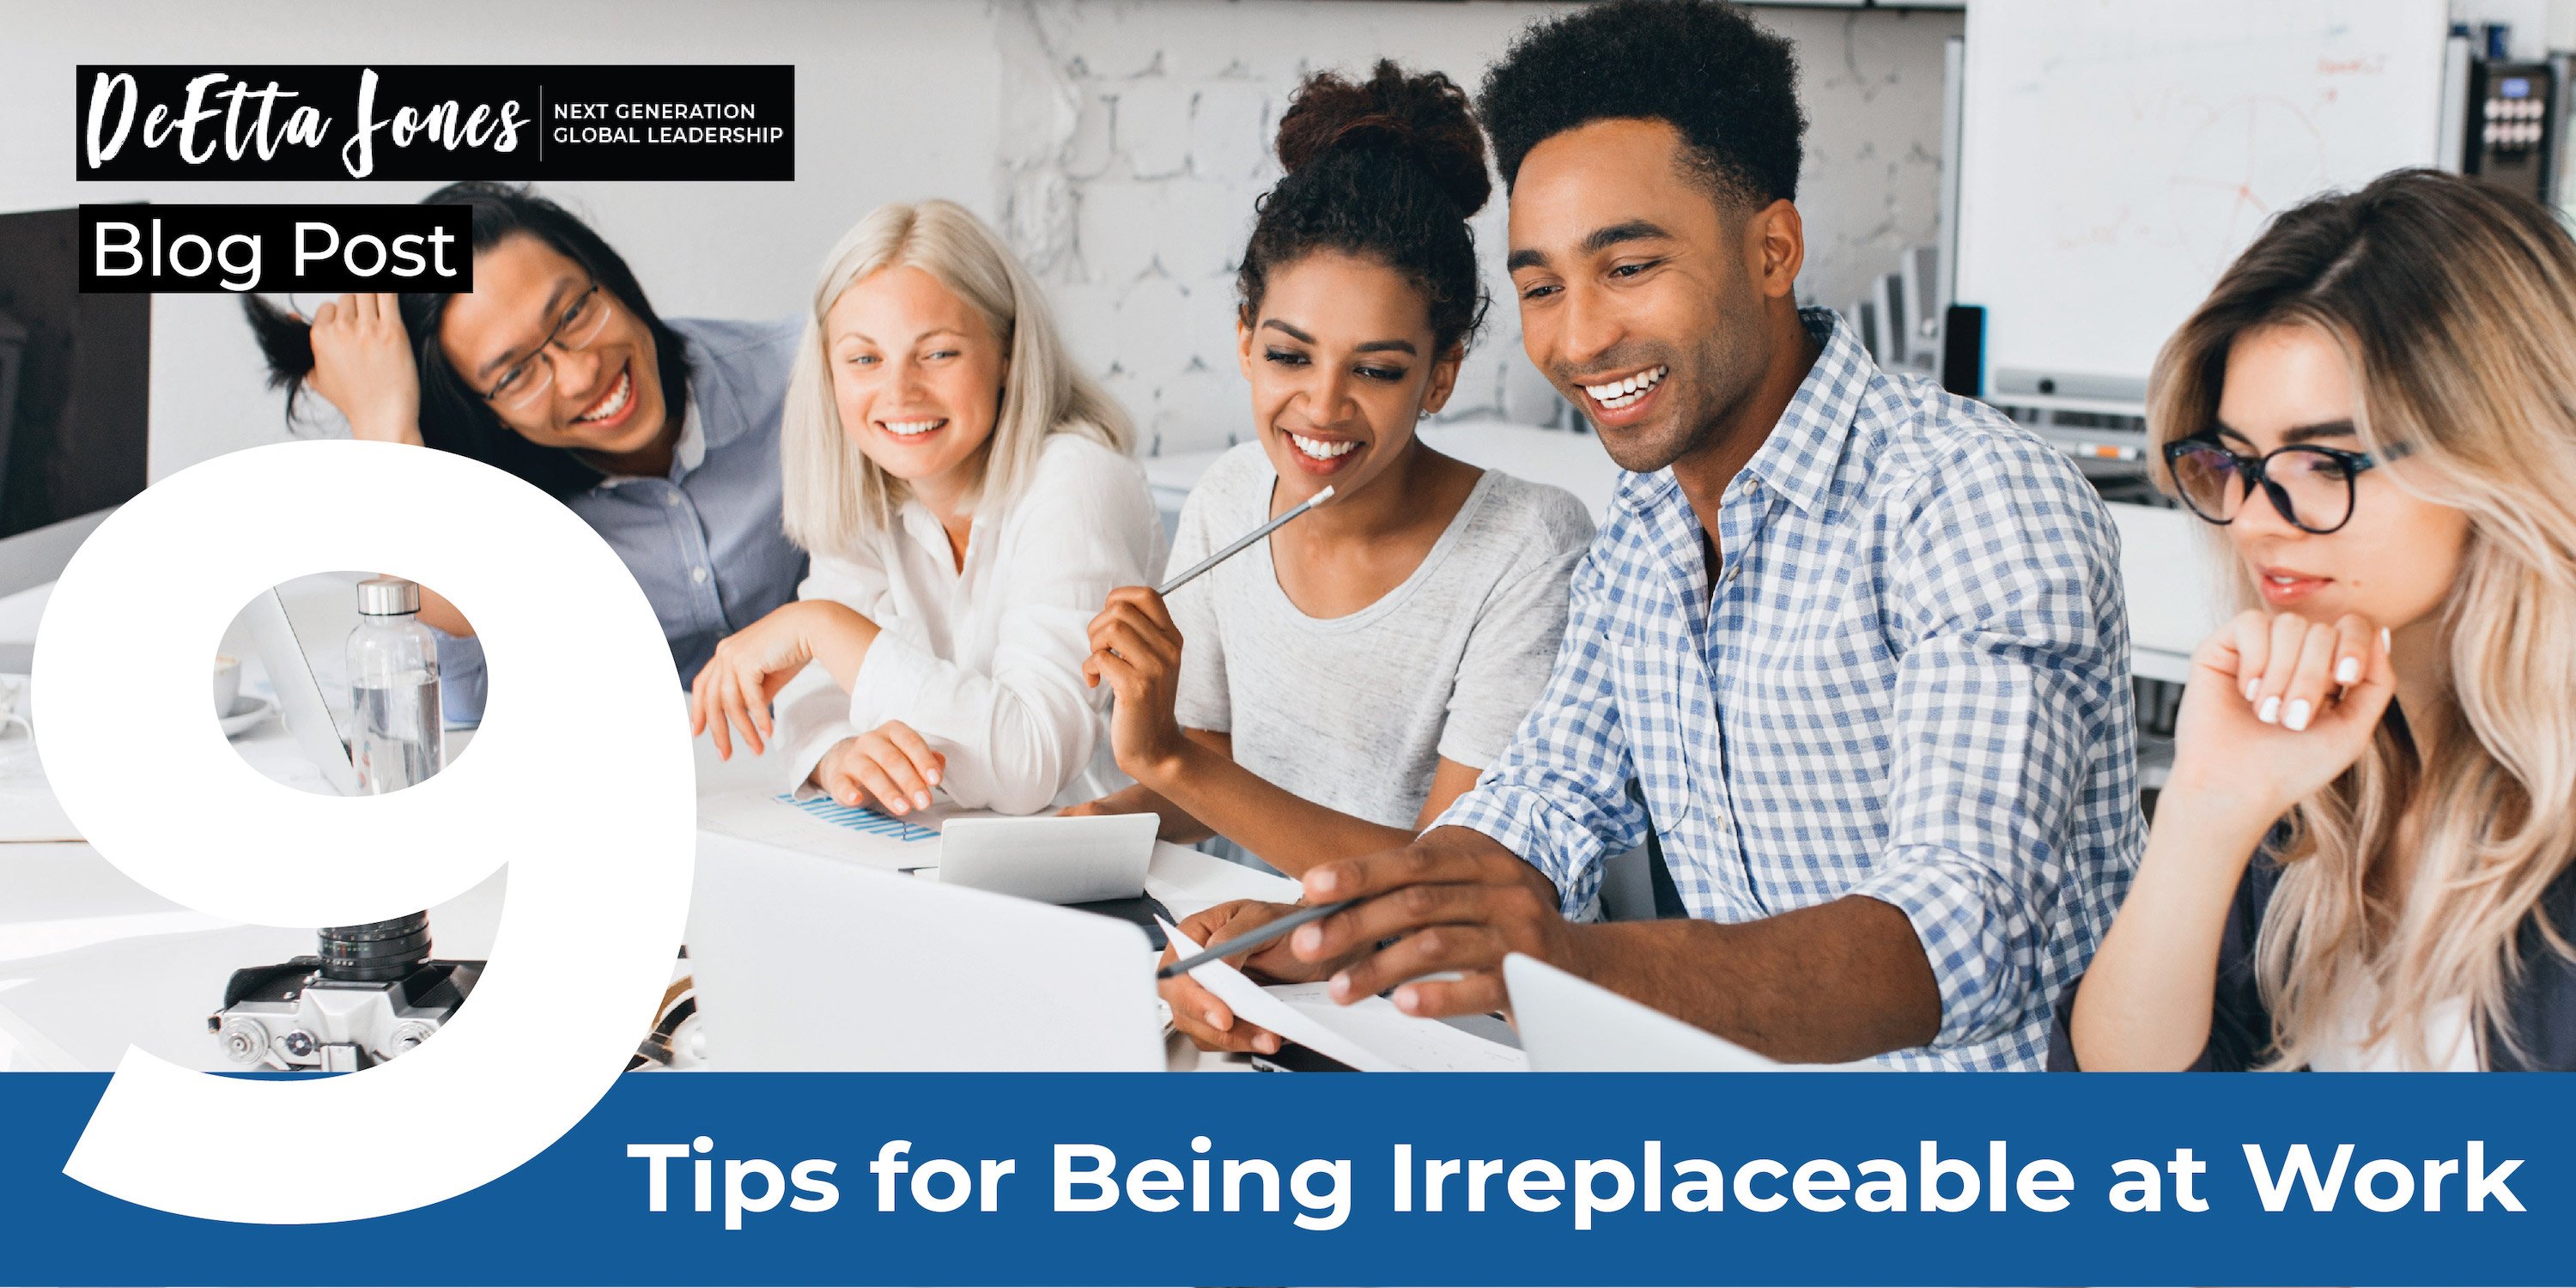 9 Tips for Being Irreplaceable at Work (Part 2 of 2)